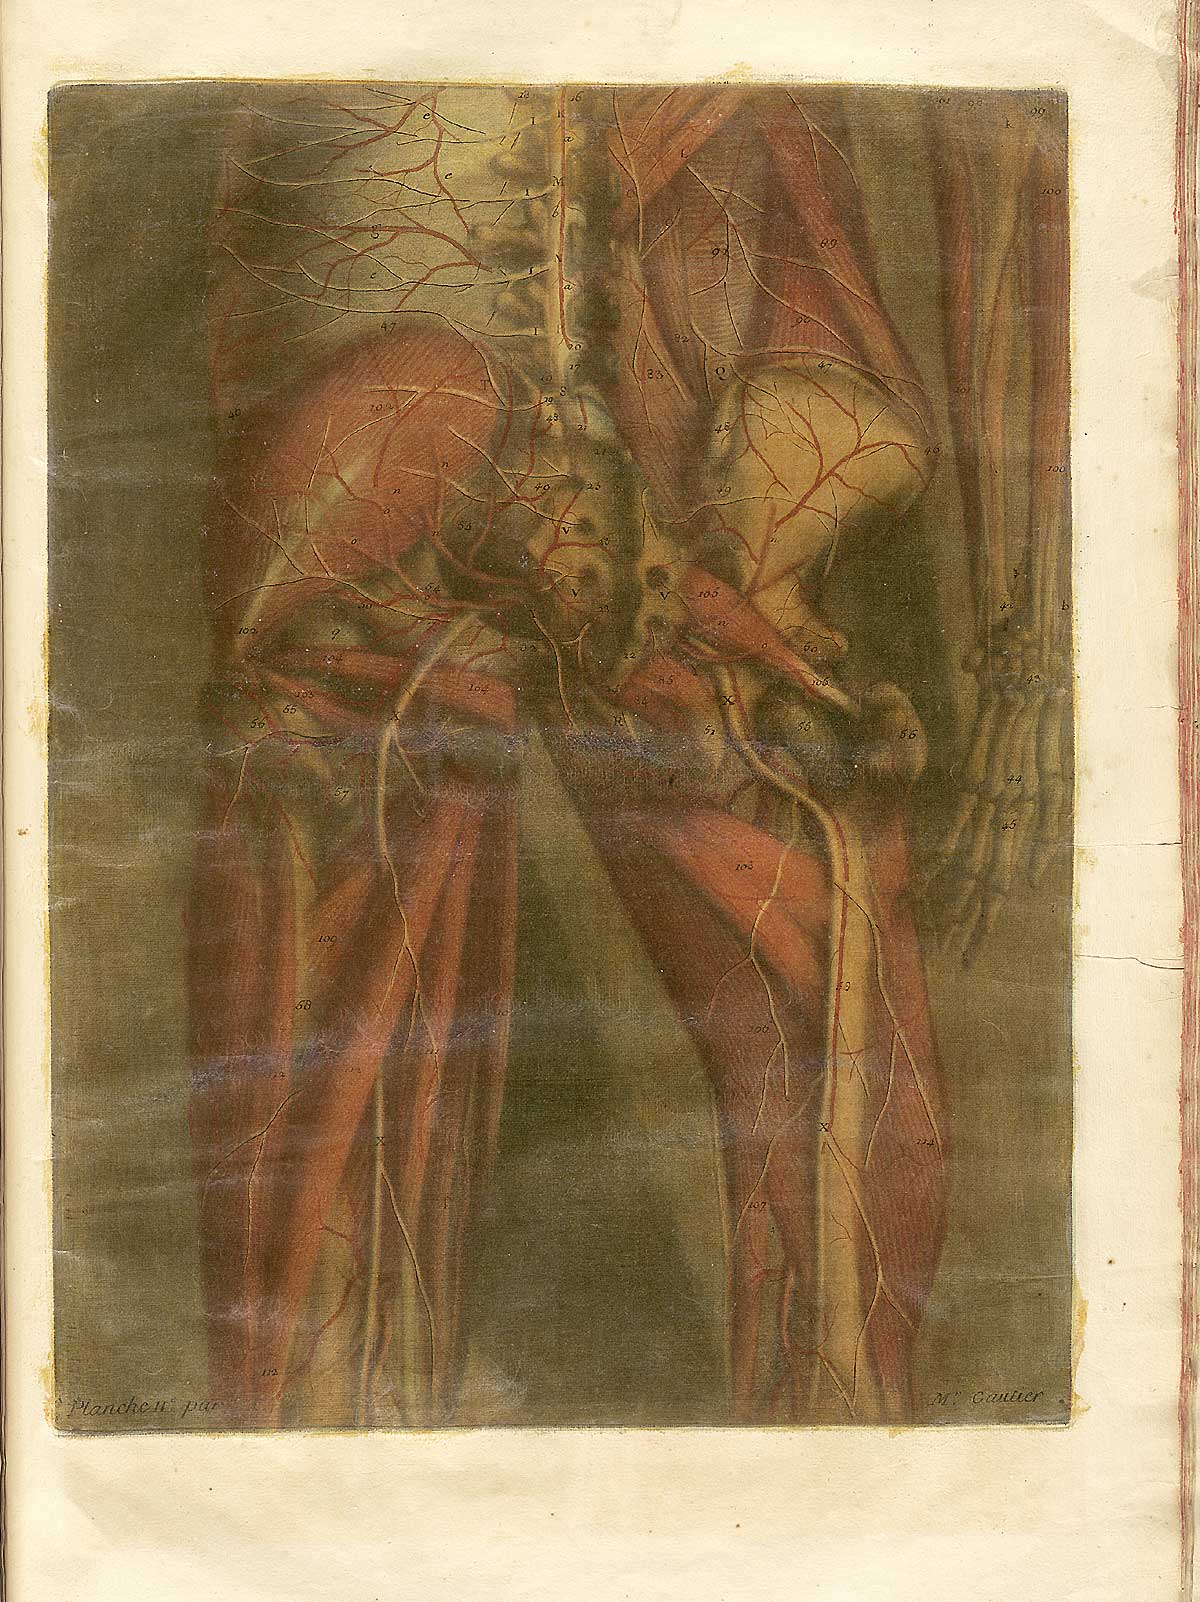 Color mezzotint of a human figure viewed from behind with most of the flesh removed to reveal the muscles and skeleton of the lower back, buttocks and upper legs; from Jacques Fabian Gautier d’Agoty’s Anatomie générale des viscères en situation, NLM Call no.: WZ 260 G283c 1745.